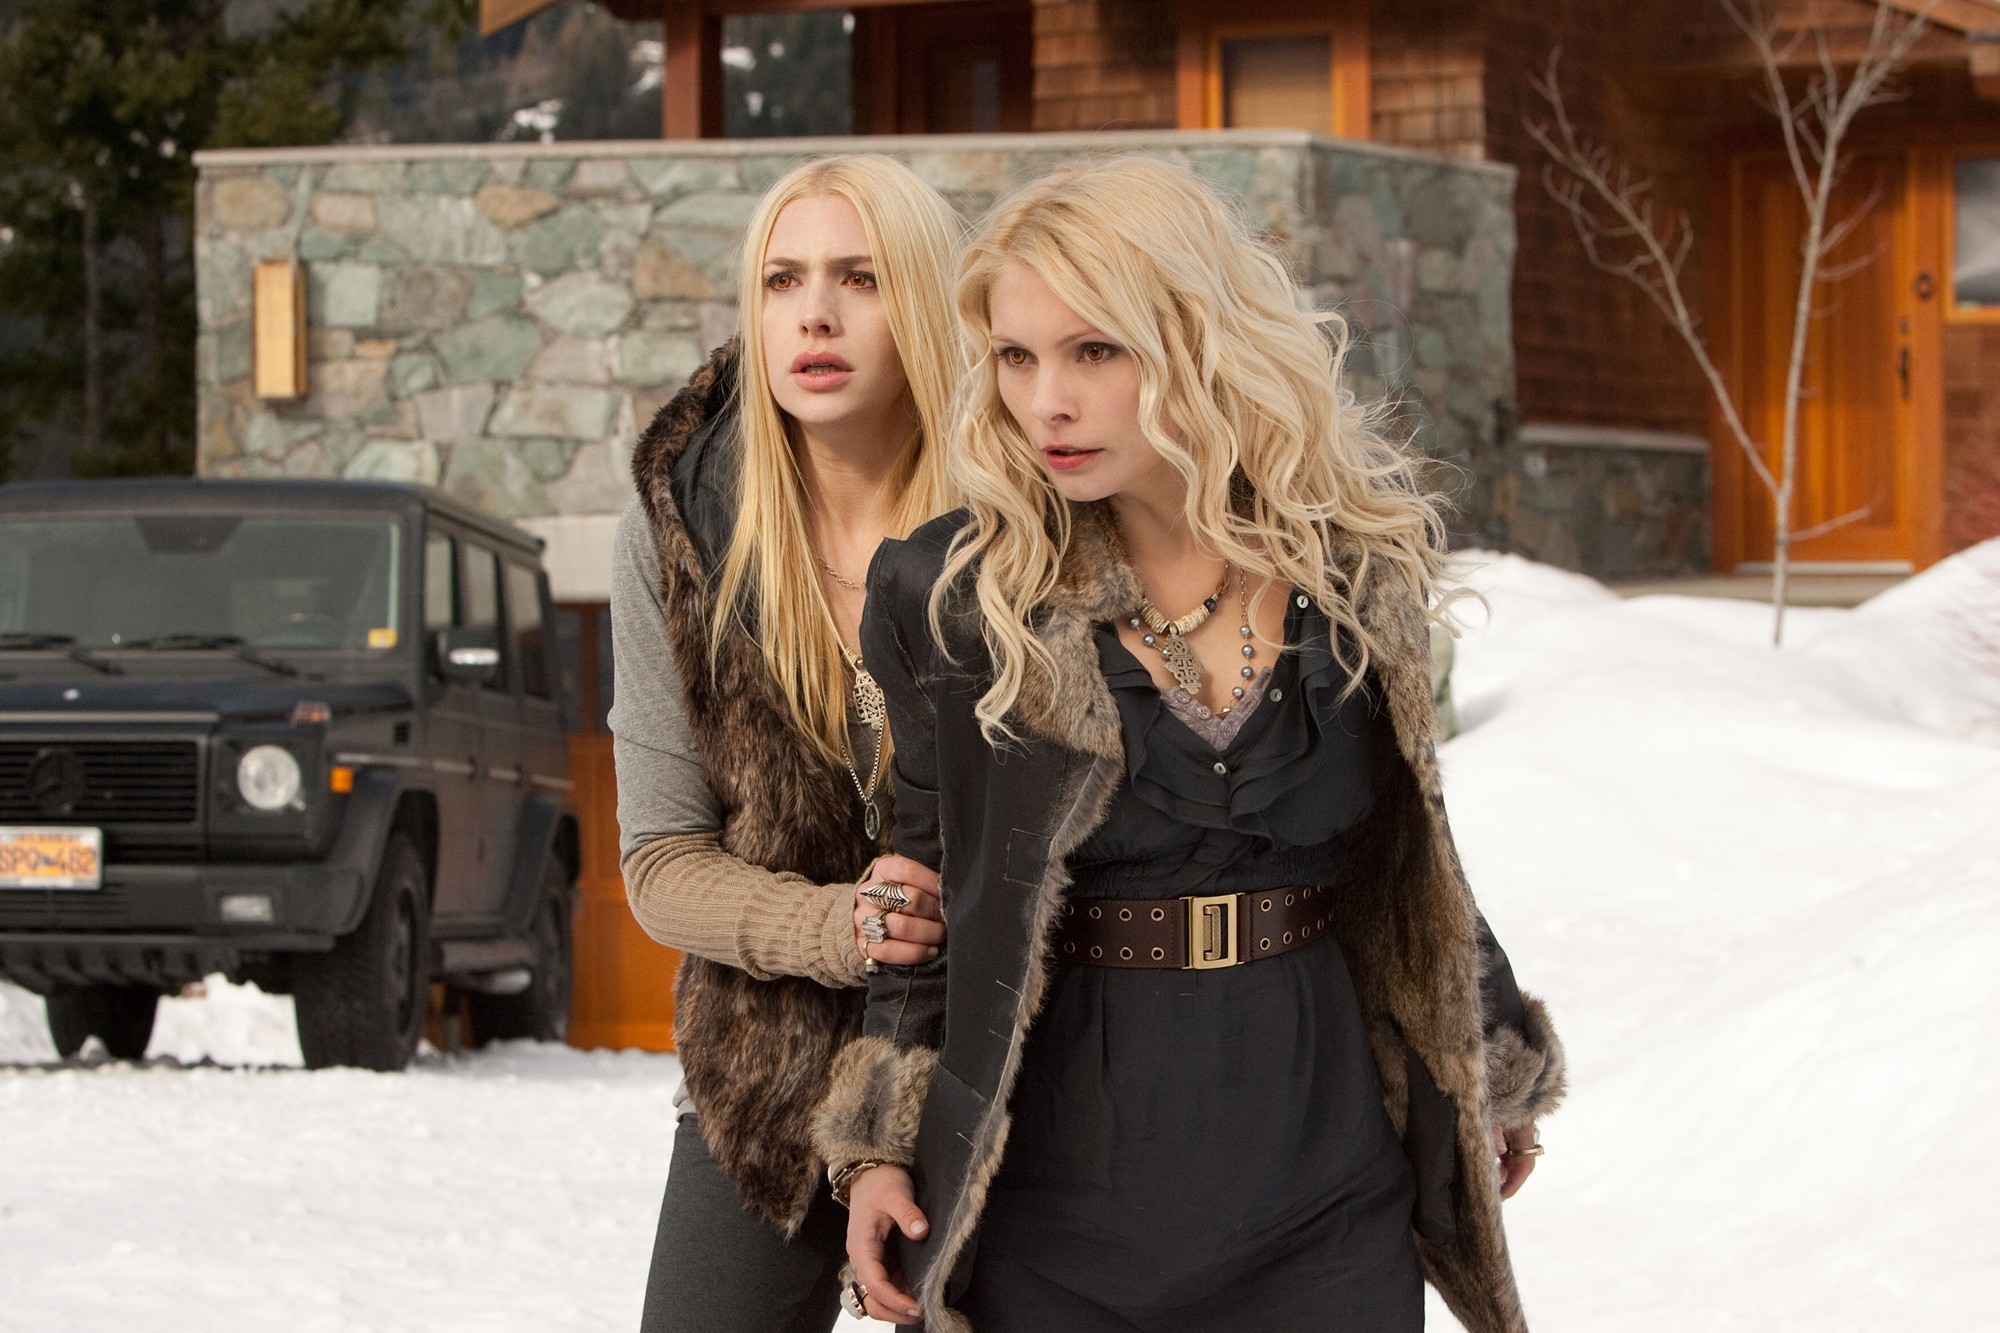 Casey LaBow stars as Kate and MyAnna Buring stars as Tanya in Summit Entertainment's The Twilight Saga's Breaking Dawn Part II (2012)